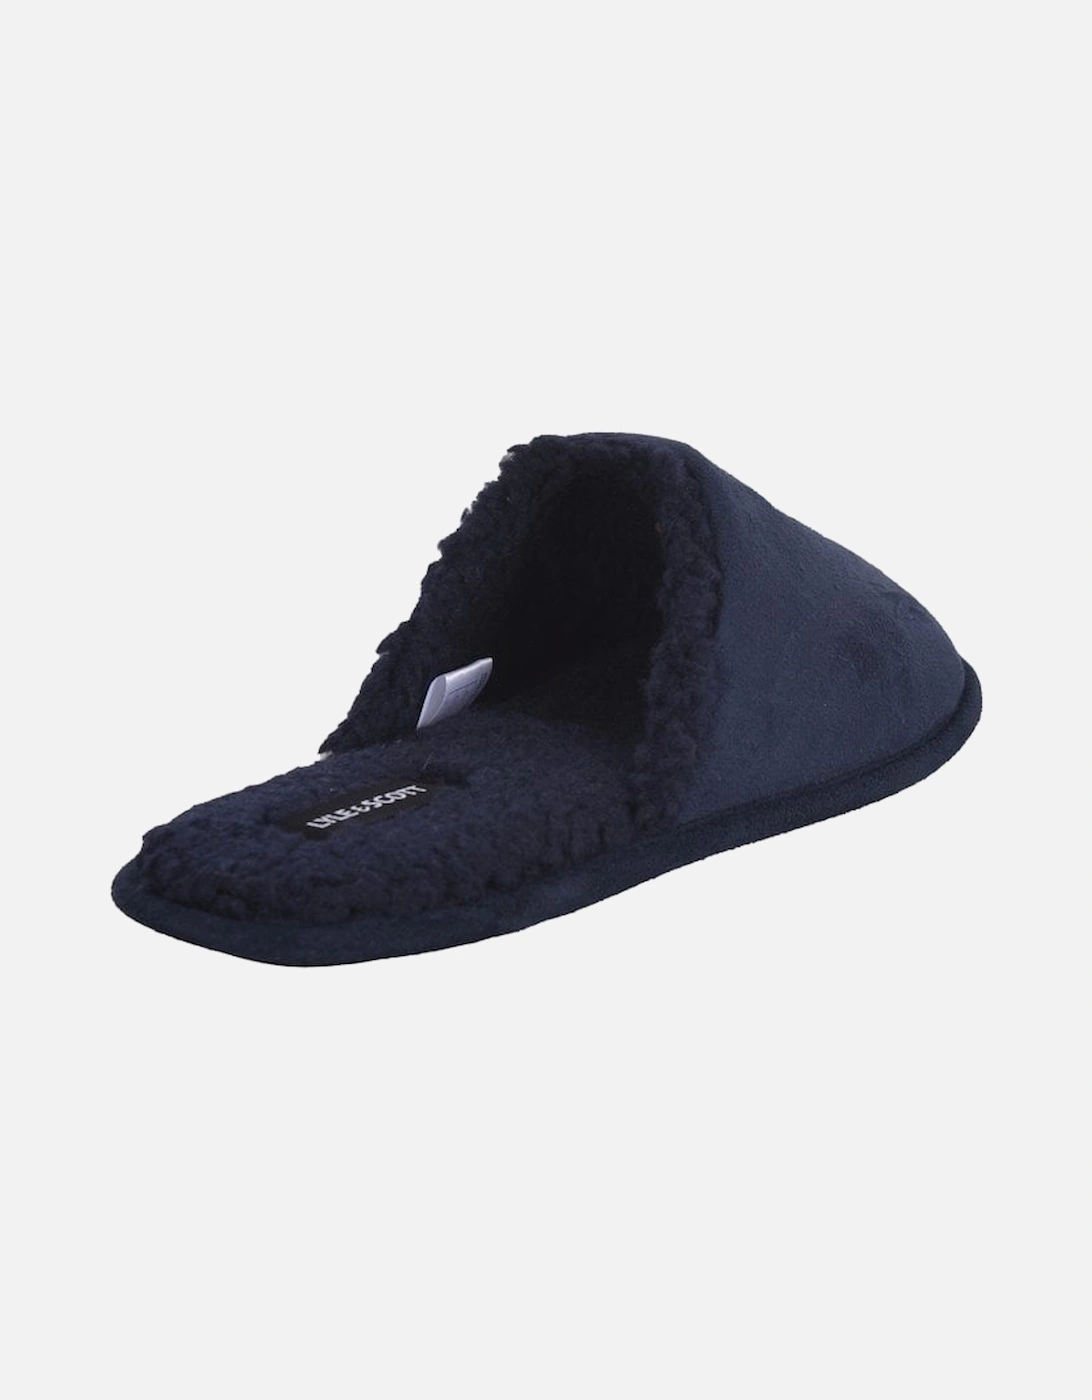 Embroidered Logo Mule Slippers, Navy